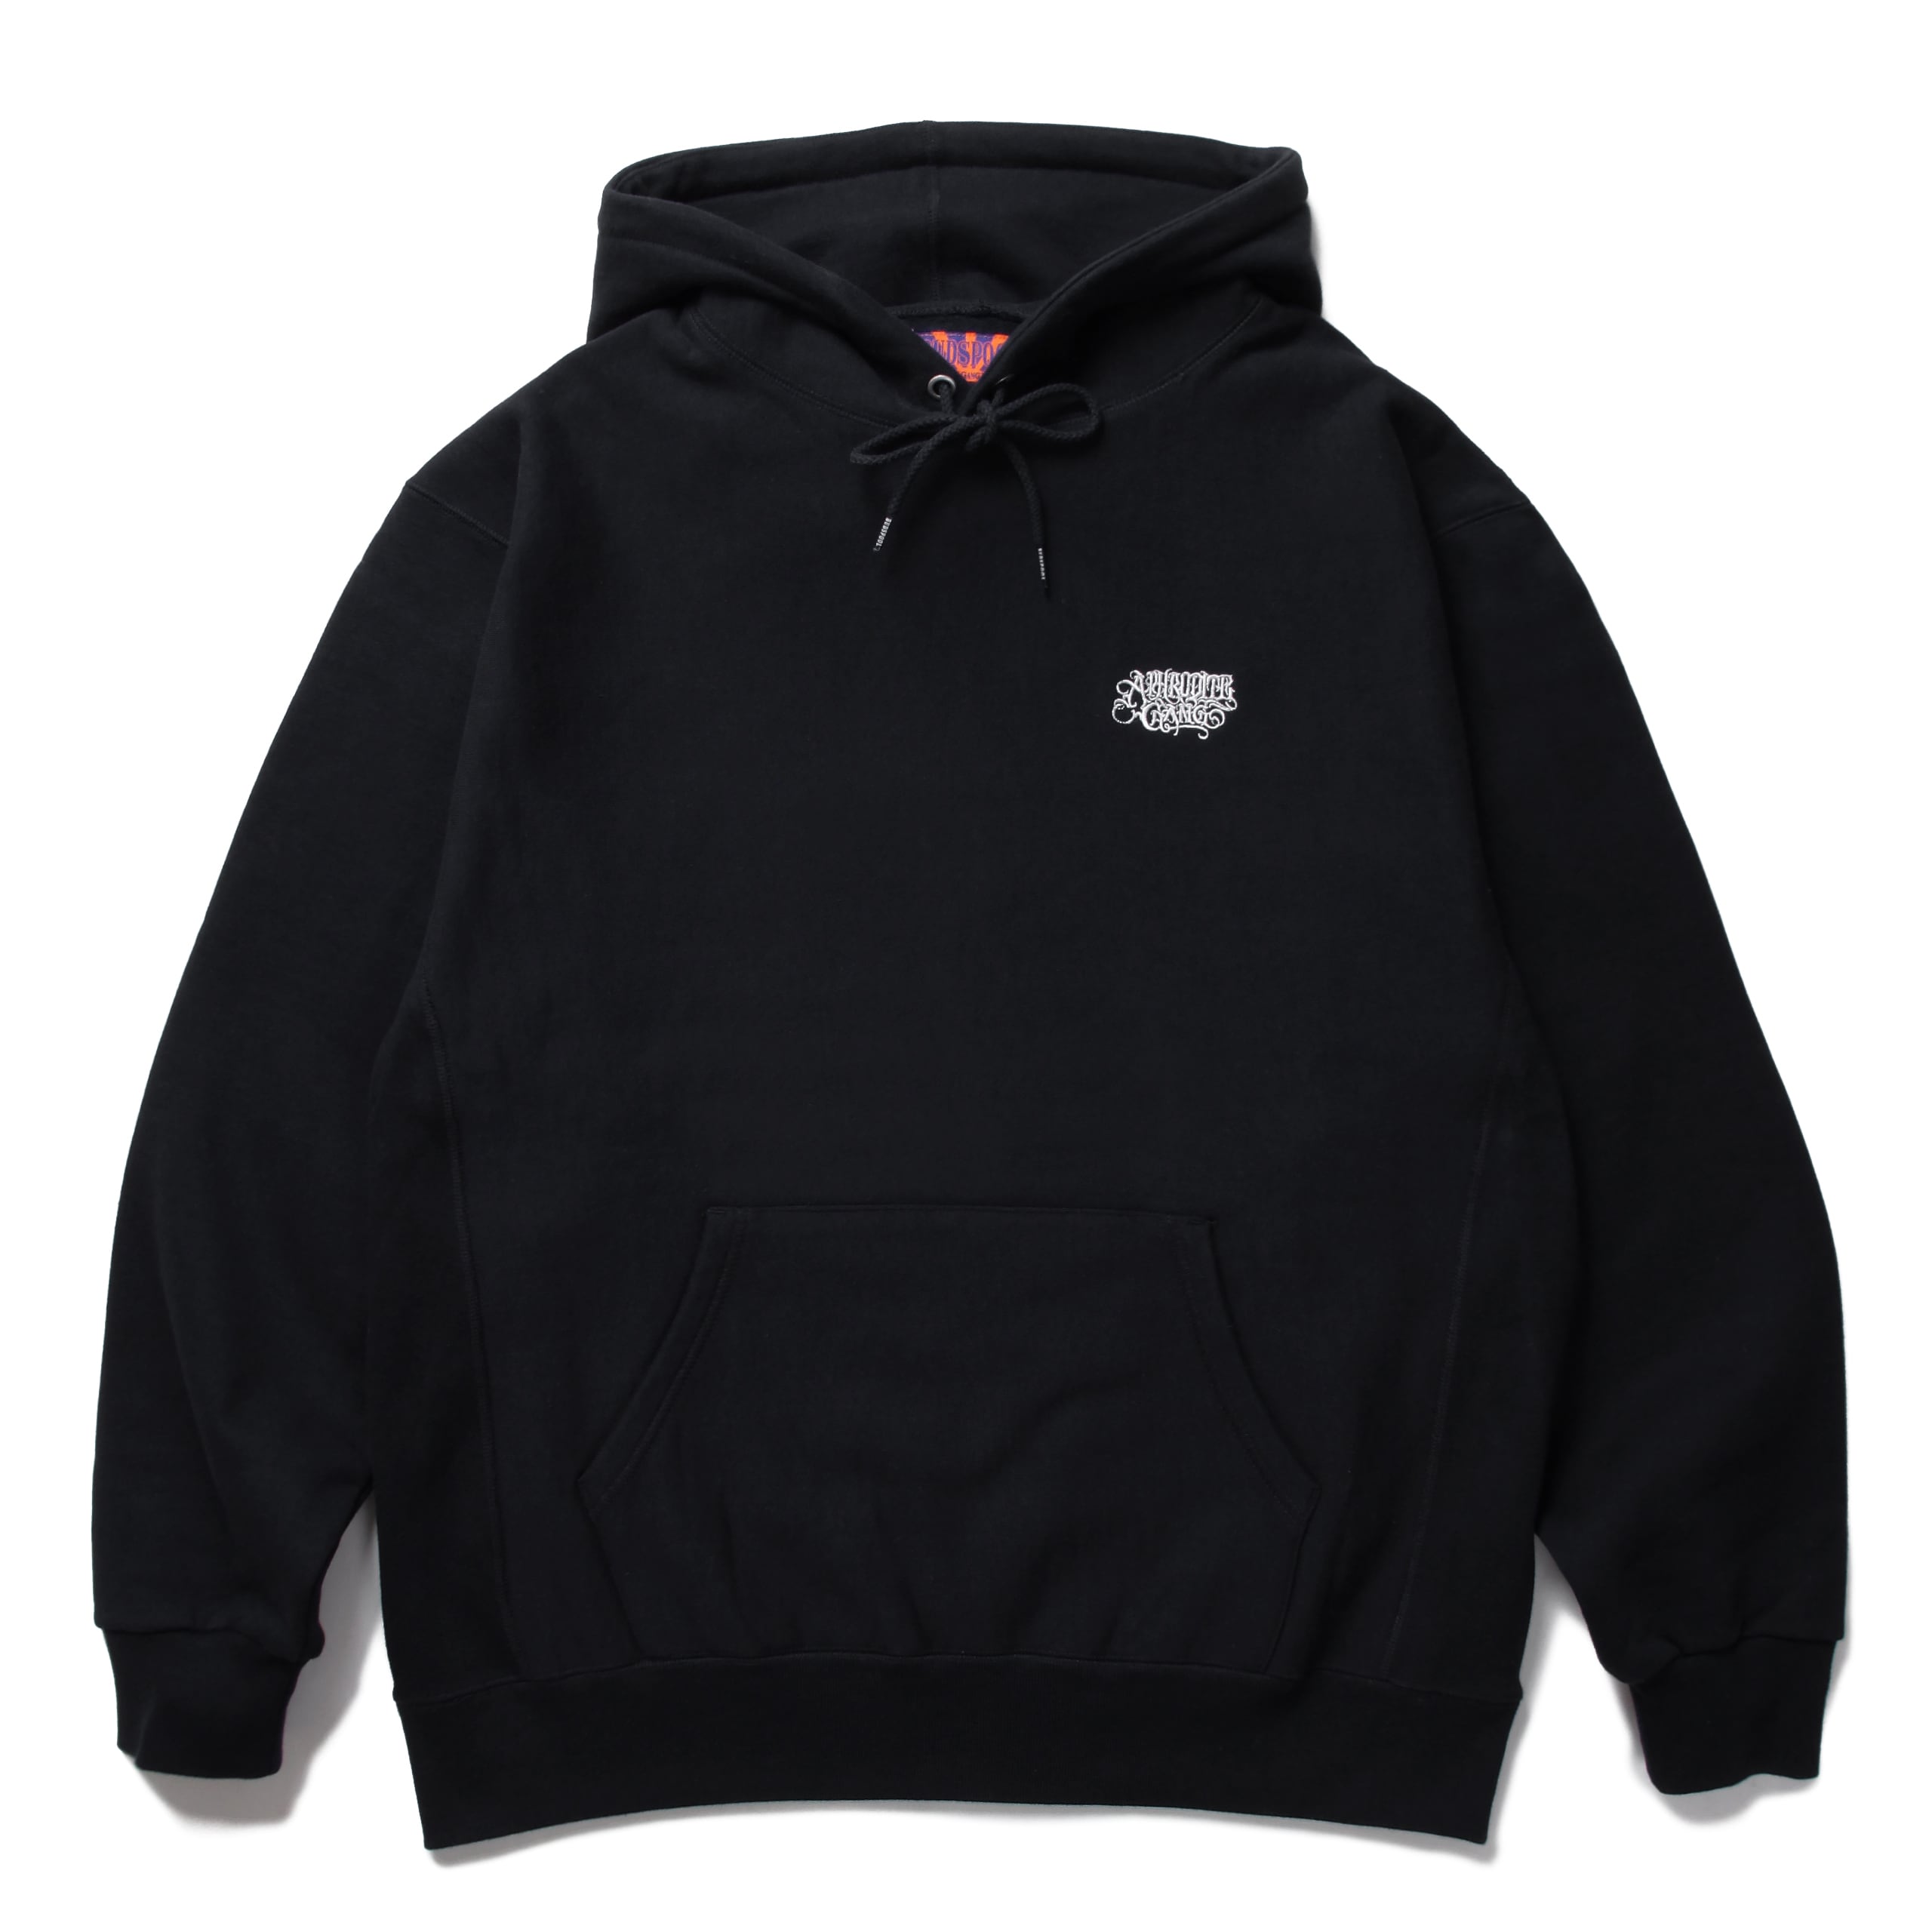 CLASSIC LOGO HEAVY WEIGHT HOODED